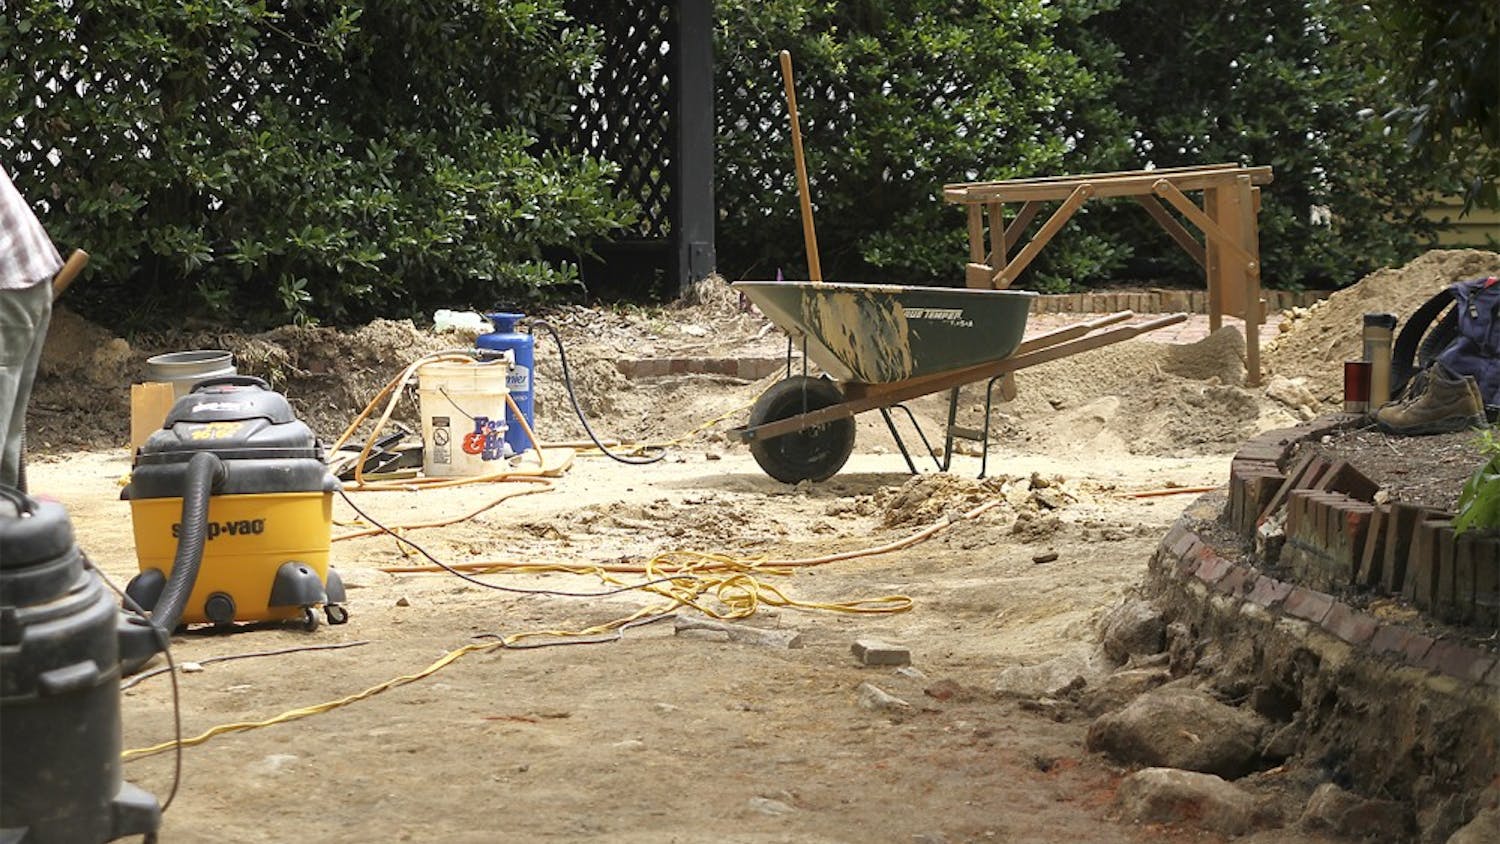 While doing construction work at UNC President Tom Ross's house on Franklin Street the remains of the original house were discovered under the driveway. Professors and graduate students from UNC's Research Laboratories of Archaeology work to unearth ruins from the site.